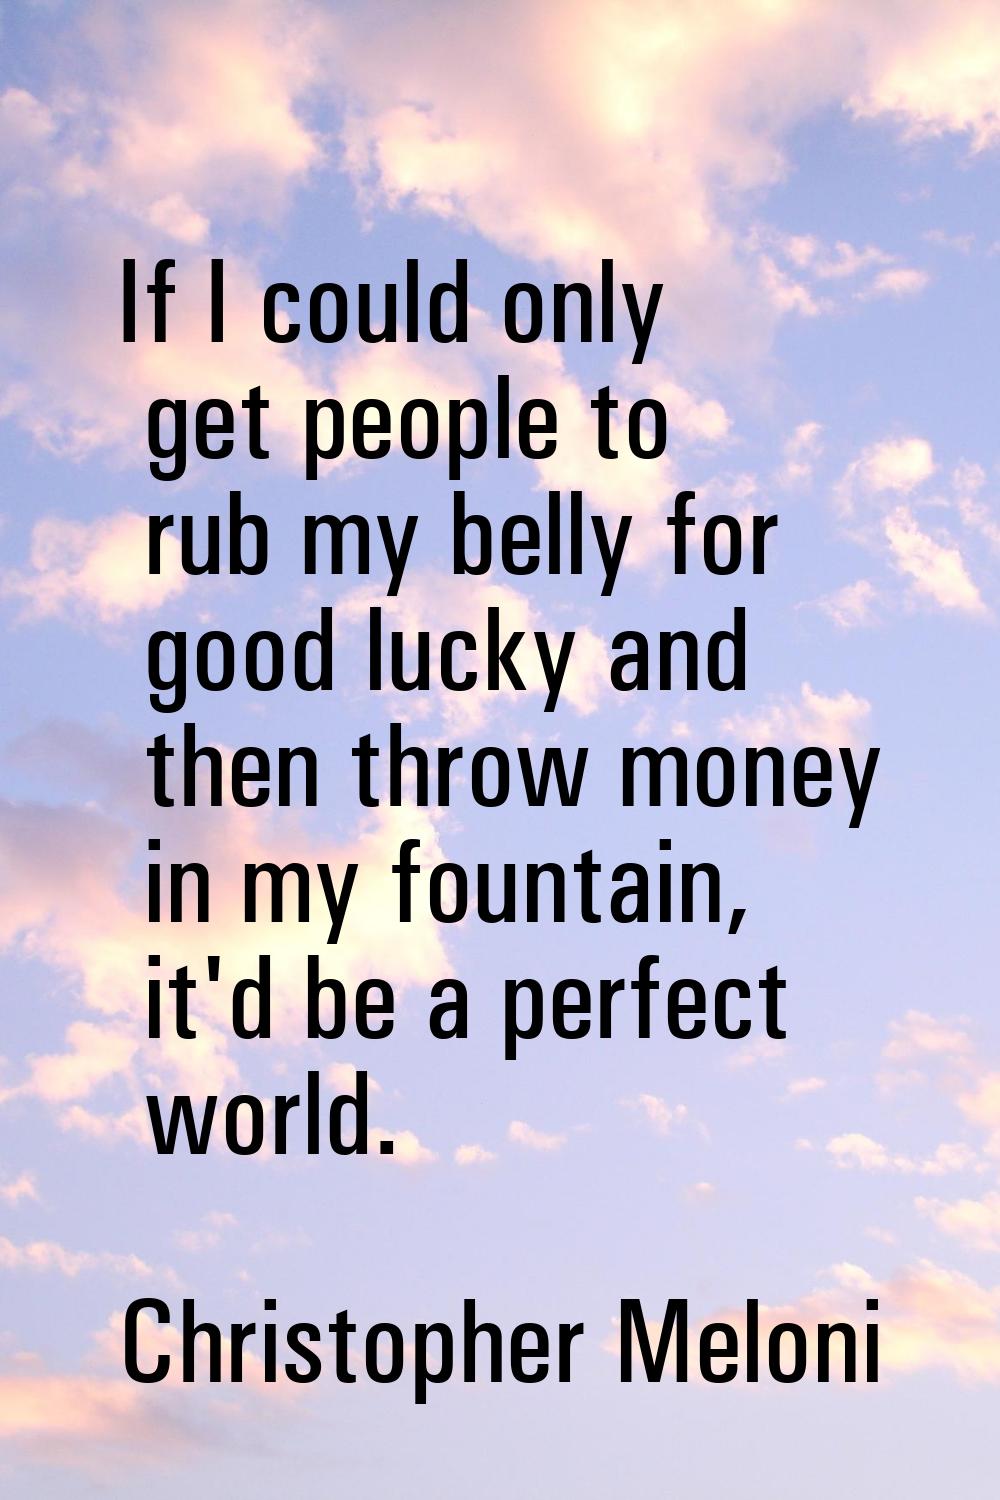 If I could only get people to rub my belly for good lucky and then throw money in my fountain, it'd